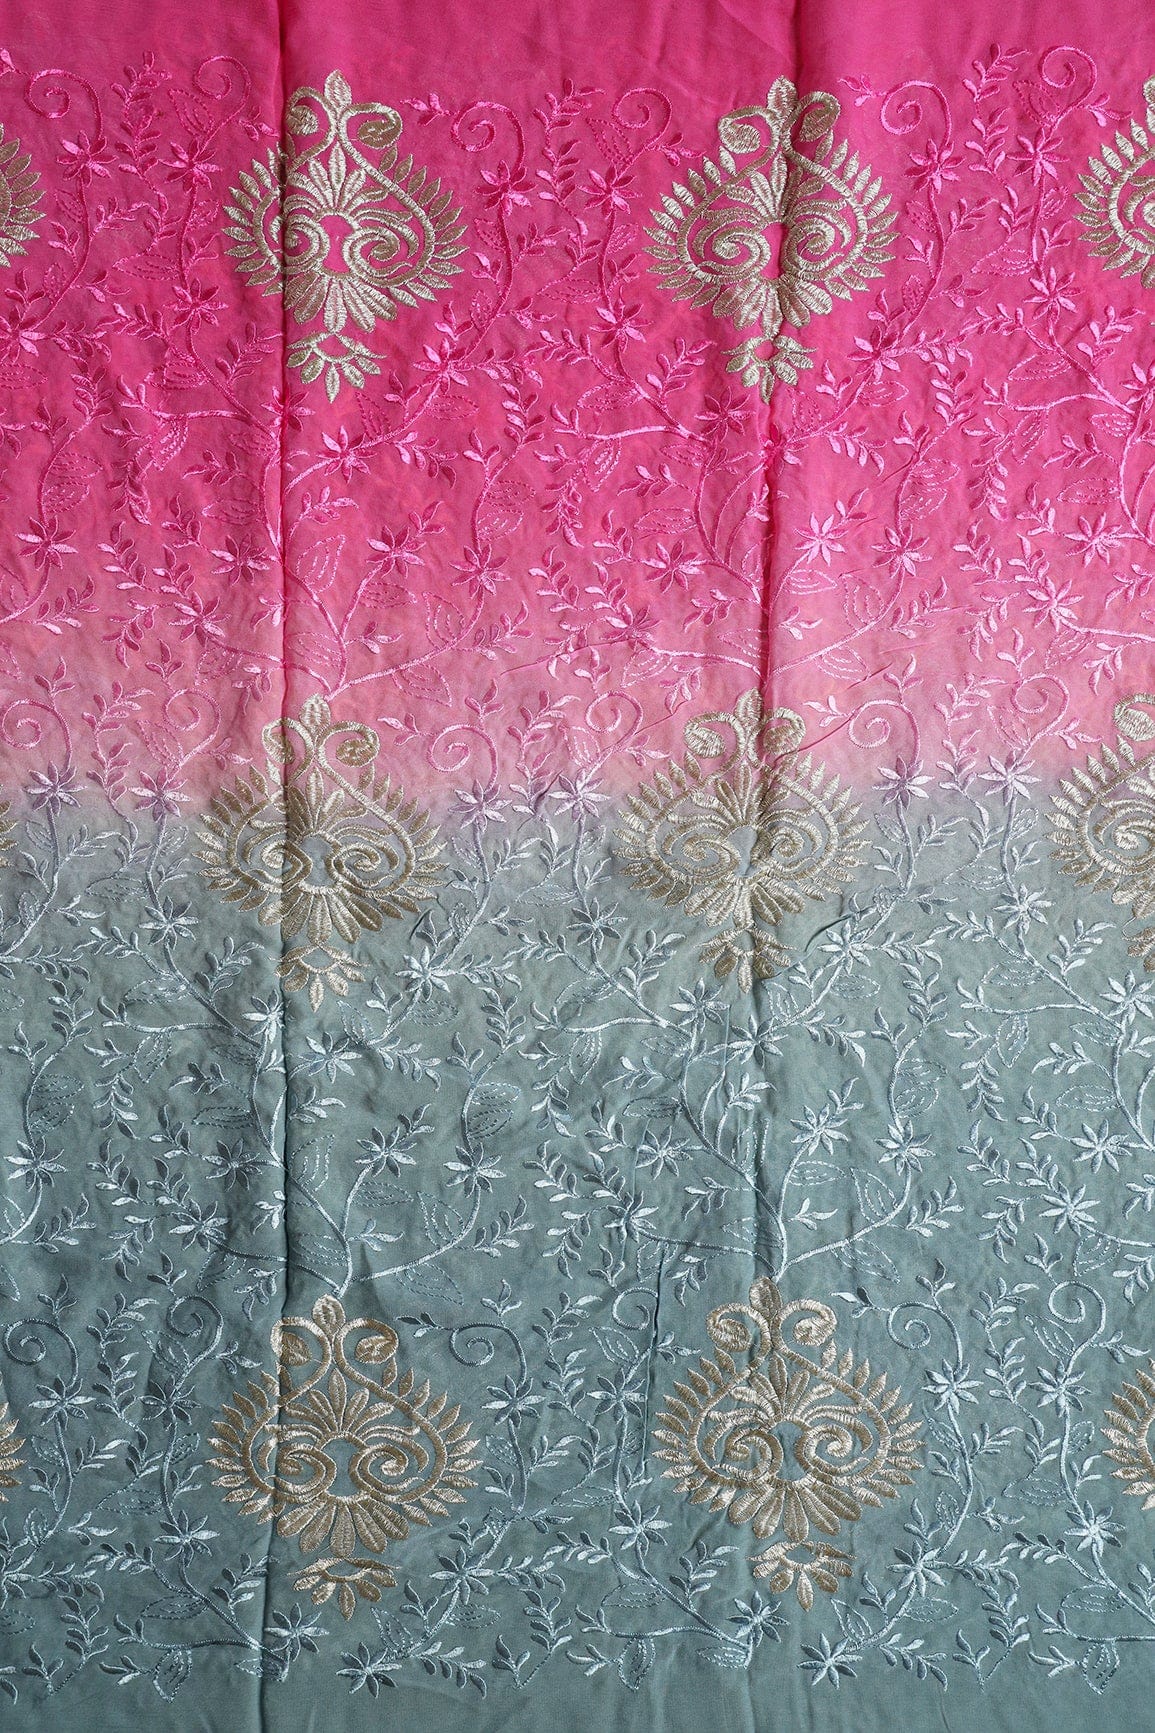 2 Meter Cut Piece Of Multi Thread With Silver Zari Floral Embroidery On Multi Color Viscose Georgette Fabric - doeraa